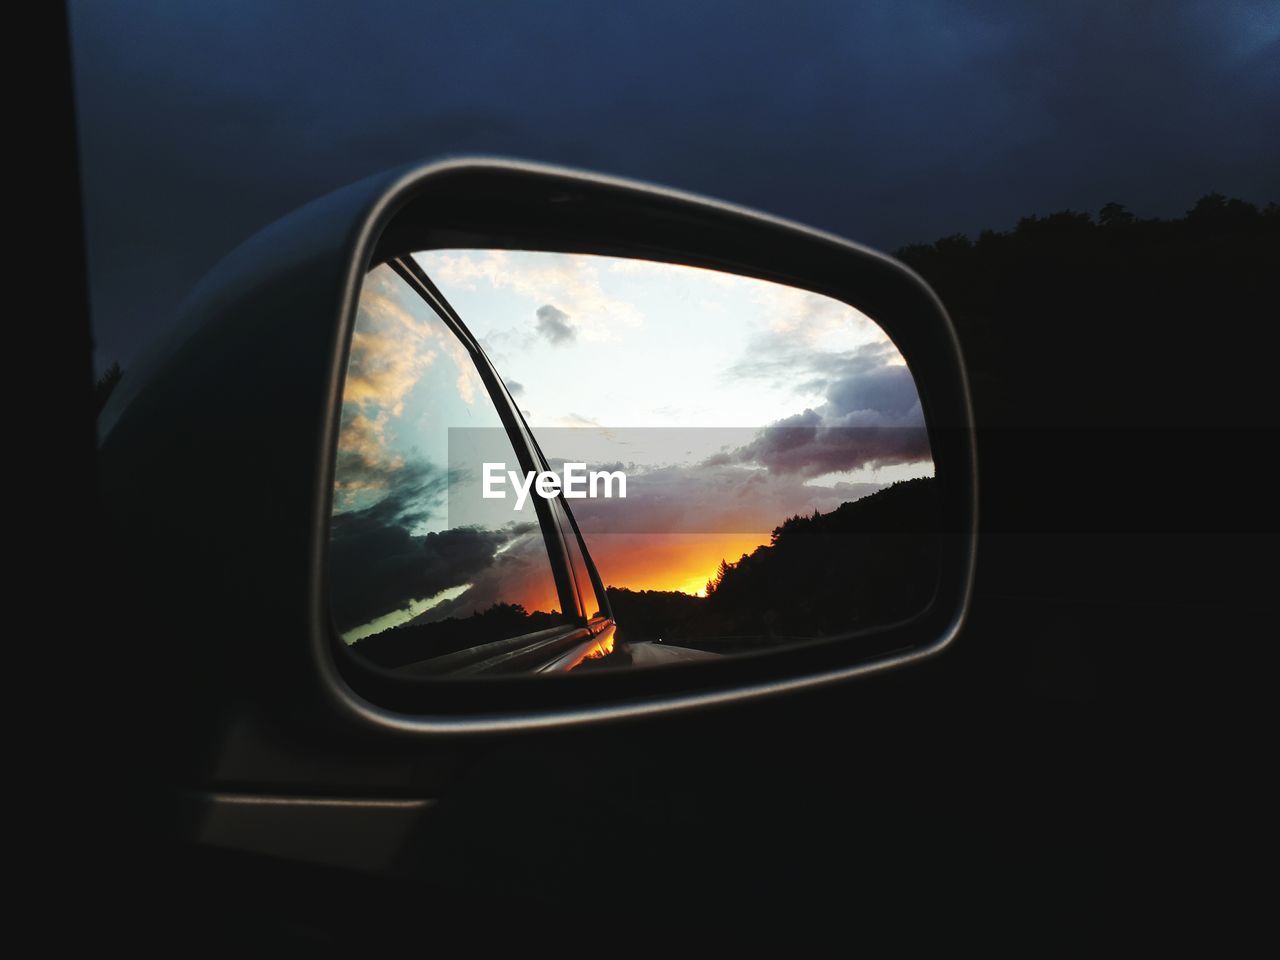 REFLECTION OF SKY ON SIDE-VIEW MIRROR OF CAR ON ROAD